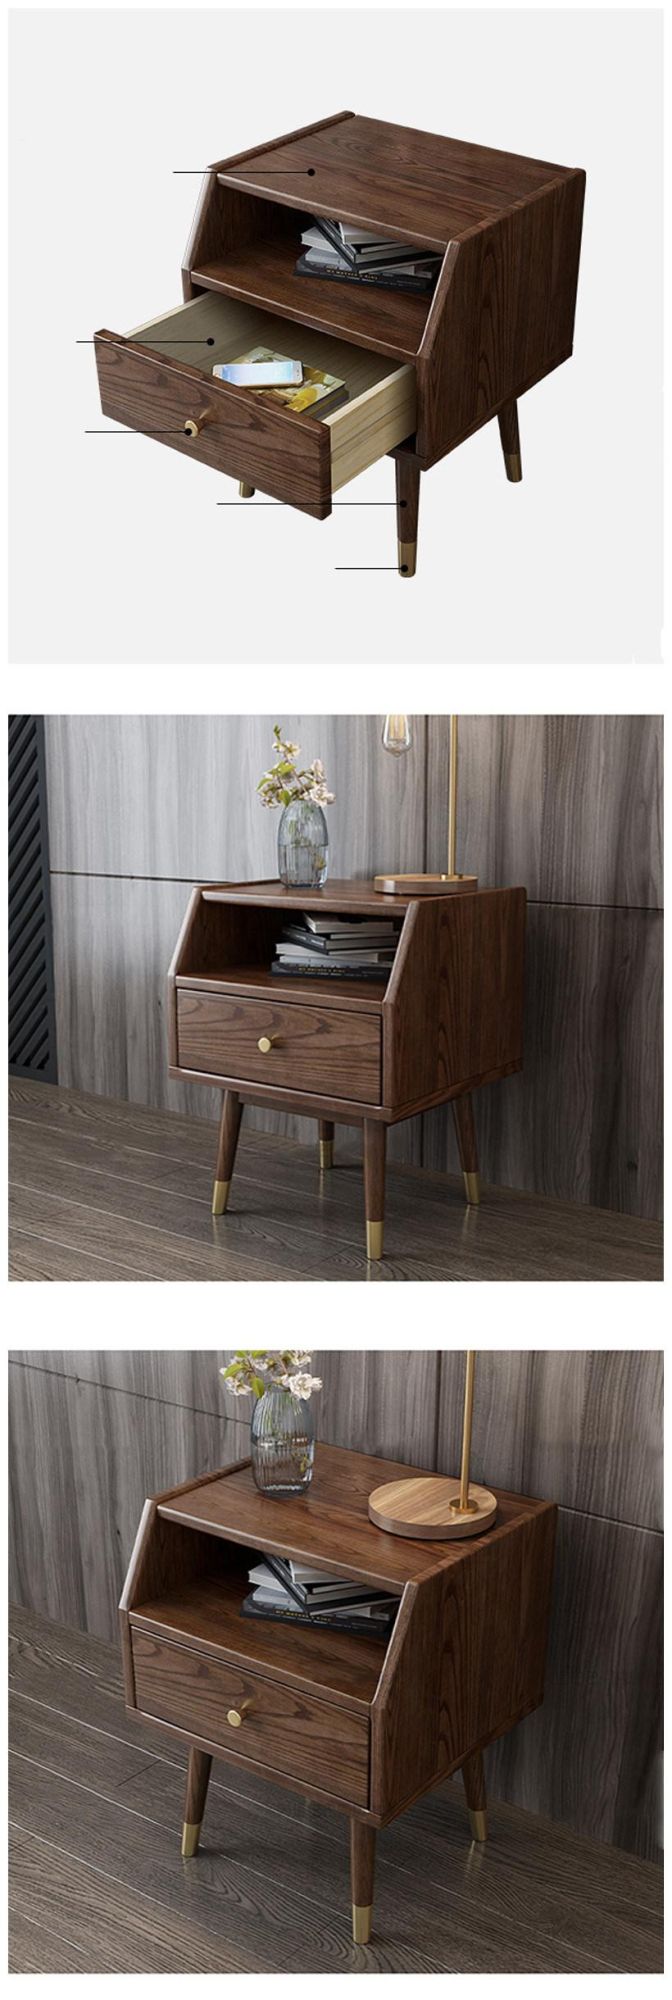 All Solid Wood Nordic Light Luxury Ash Wood Simple Bedside Table Walnut Storage Cabinet Side Cabinet Wood Wax Oil Furniture 0029